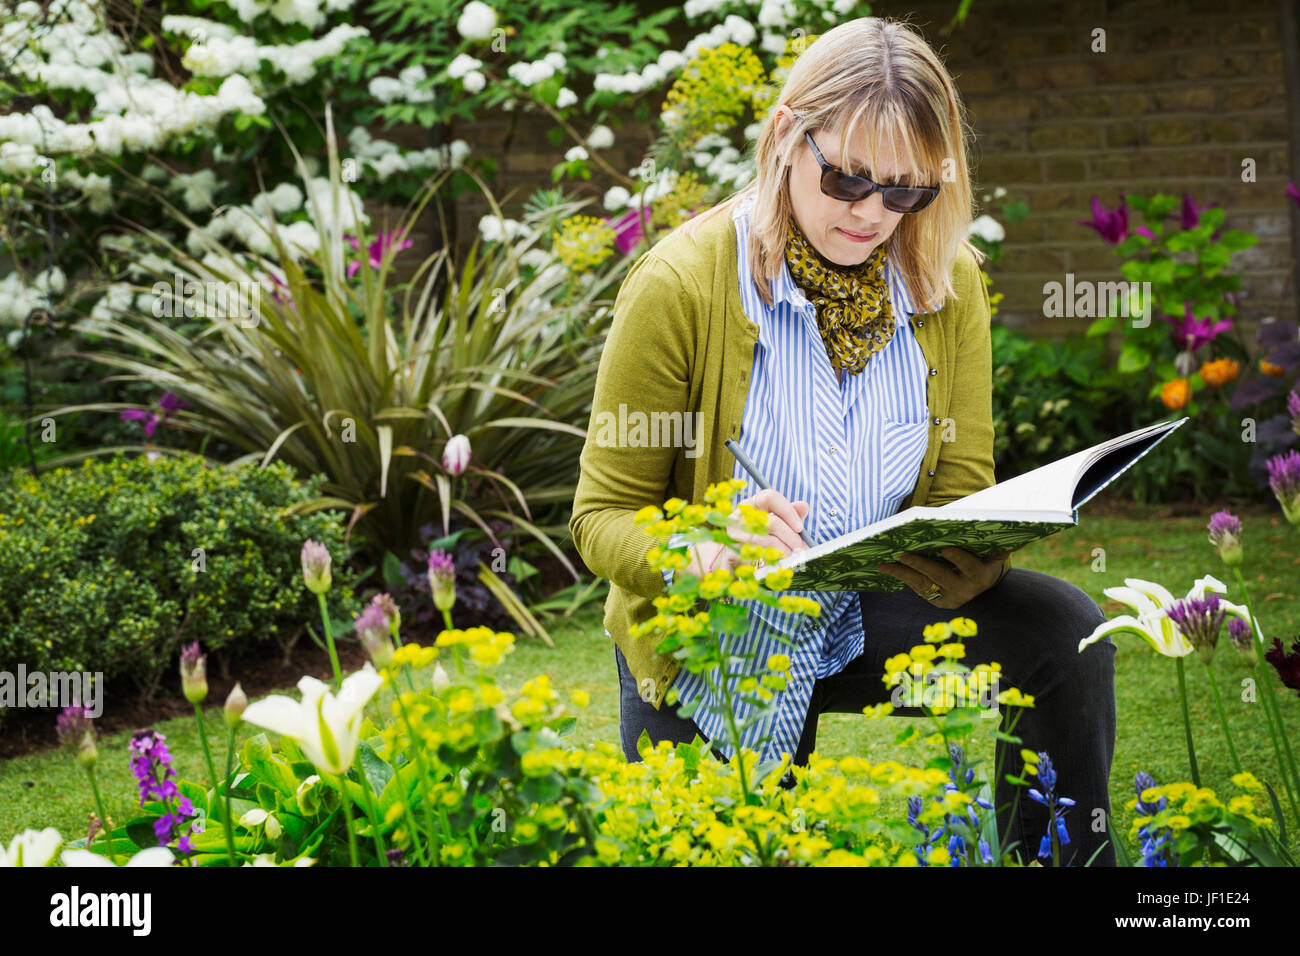 Woman wearing sunglasses standing in a garden by a flowerbed, drawing in a sketchbook. Stock Photo